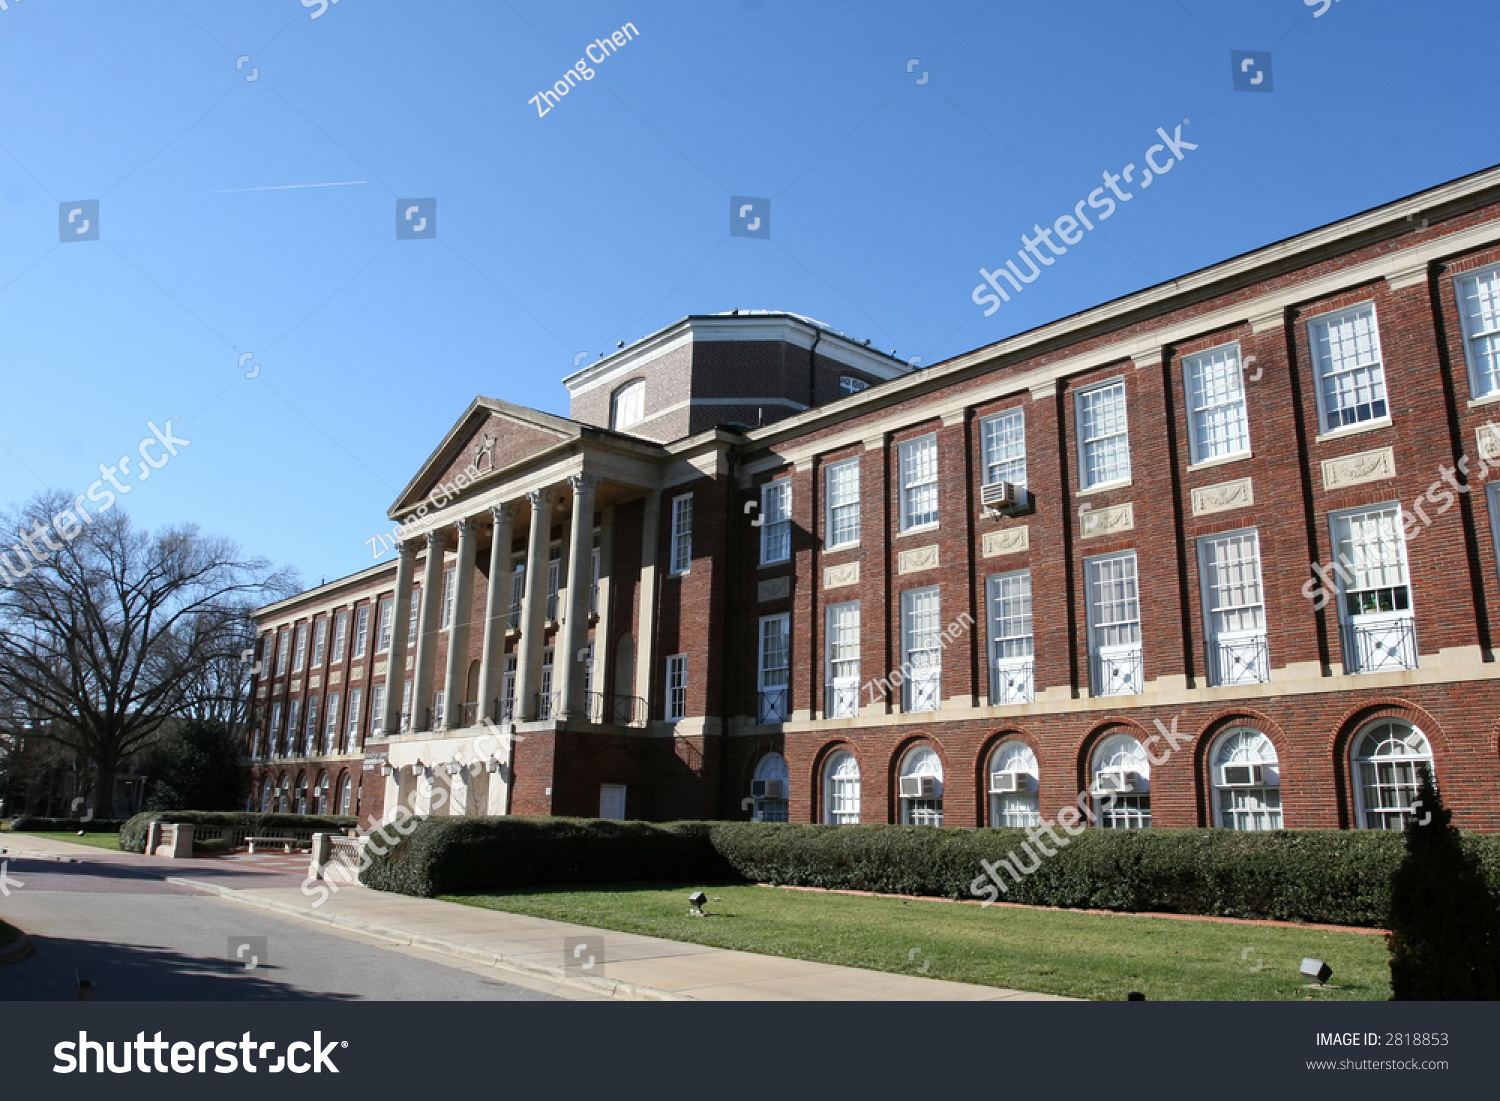 Meredith College Raleigh Nc Stock Photo 2818853 - Shutterstock